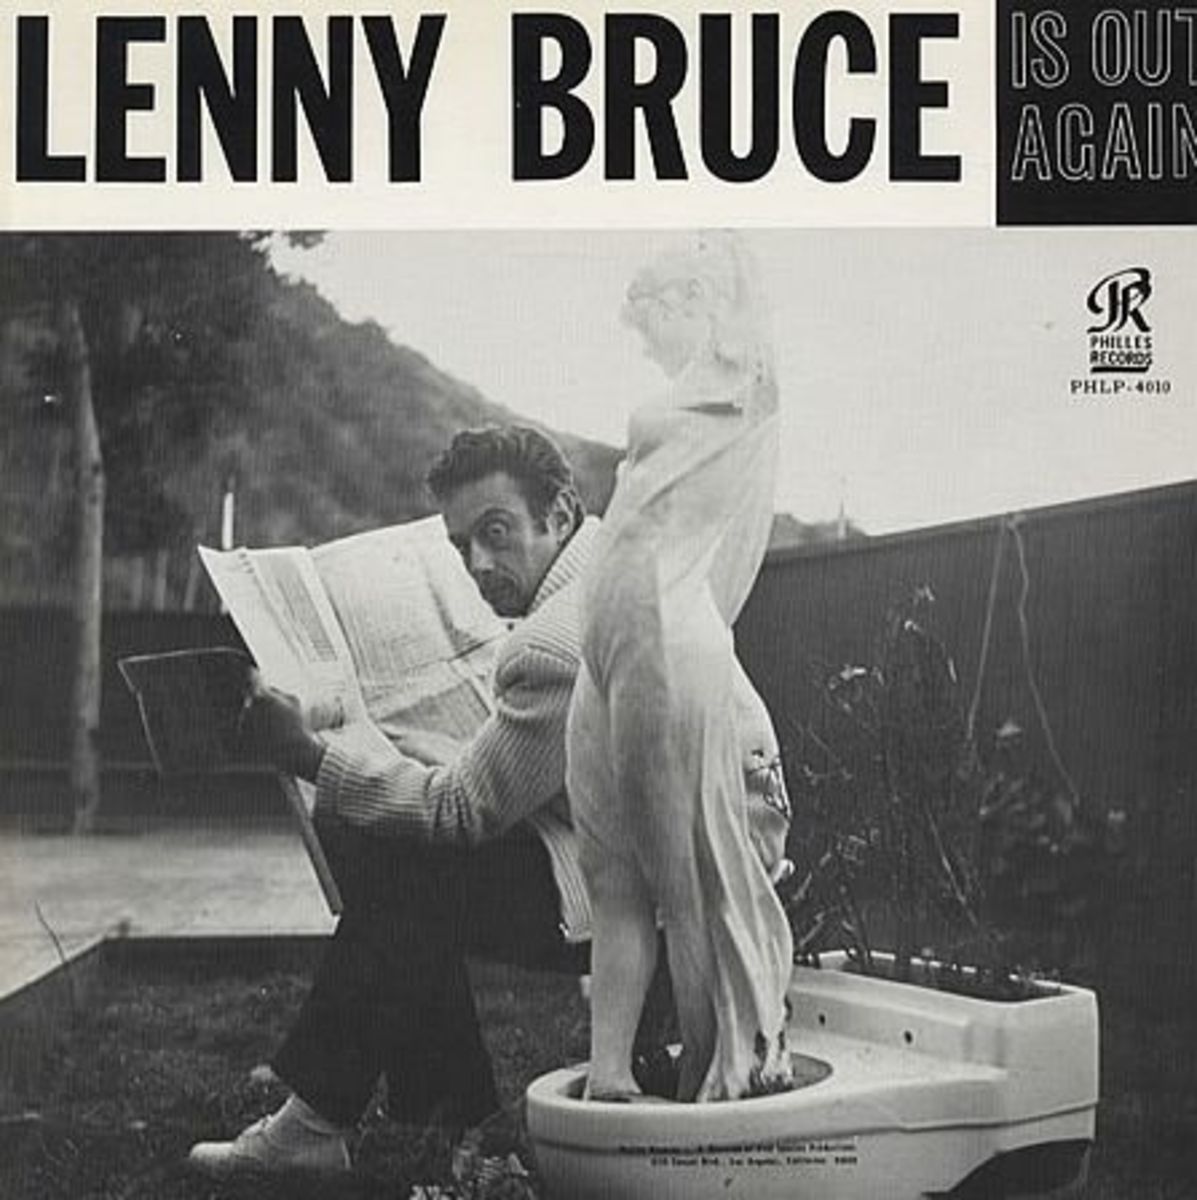 Lenny Bruce "Is Out Again" Philles Records PHLP 4010 12" Record